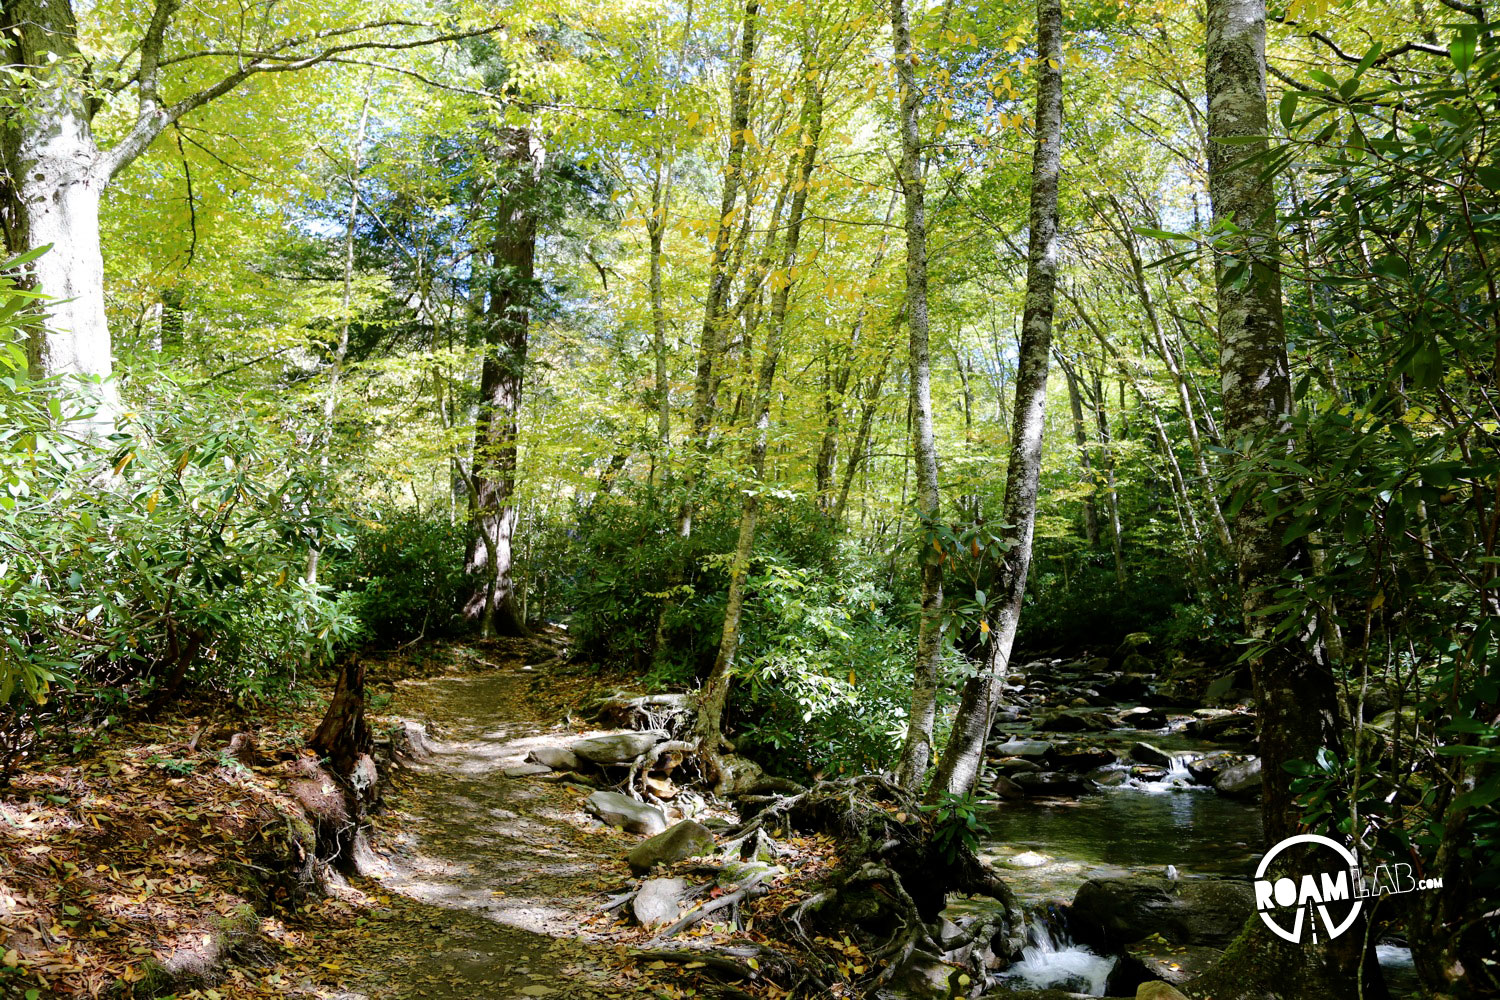 The Alum Creek Trail in the Great Smokey Mountains follows the Alum Cave Creek for the first 1.3 miles.